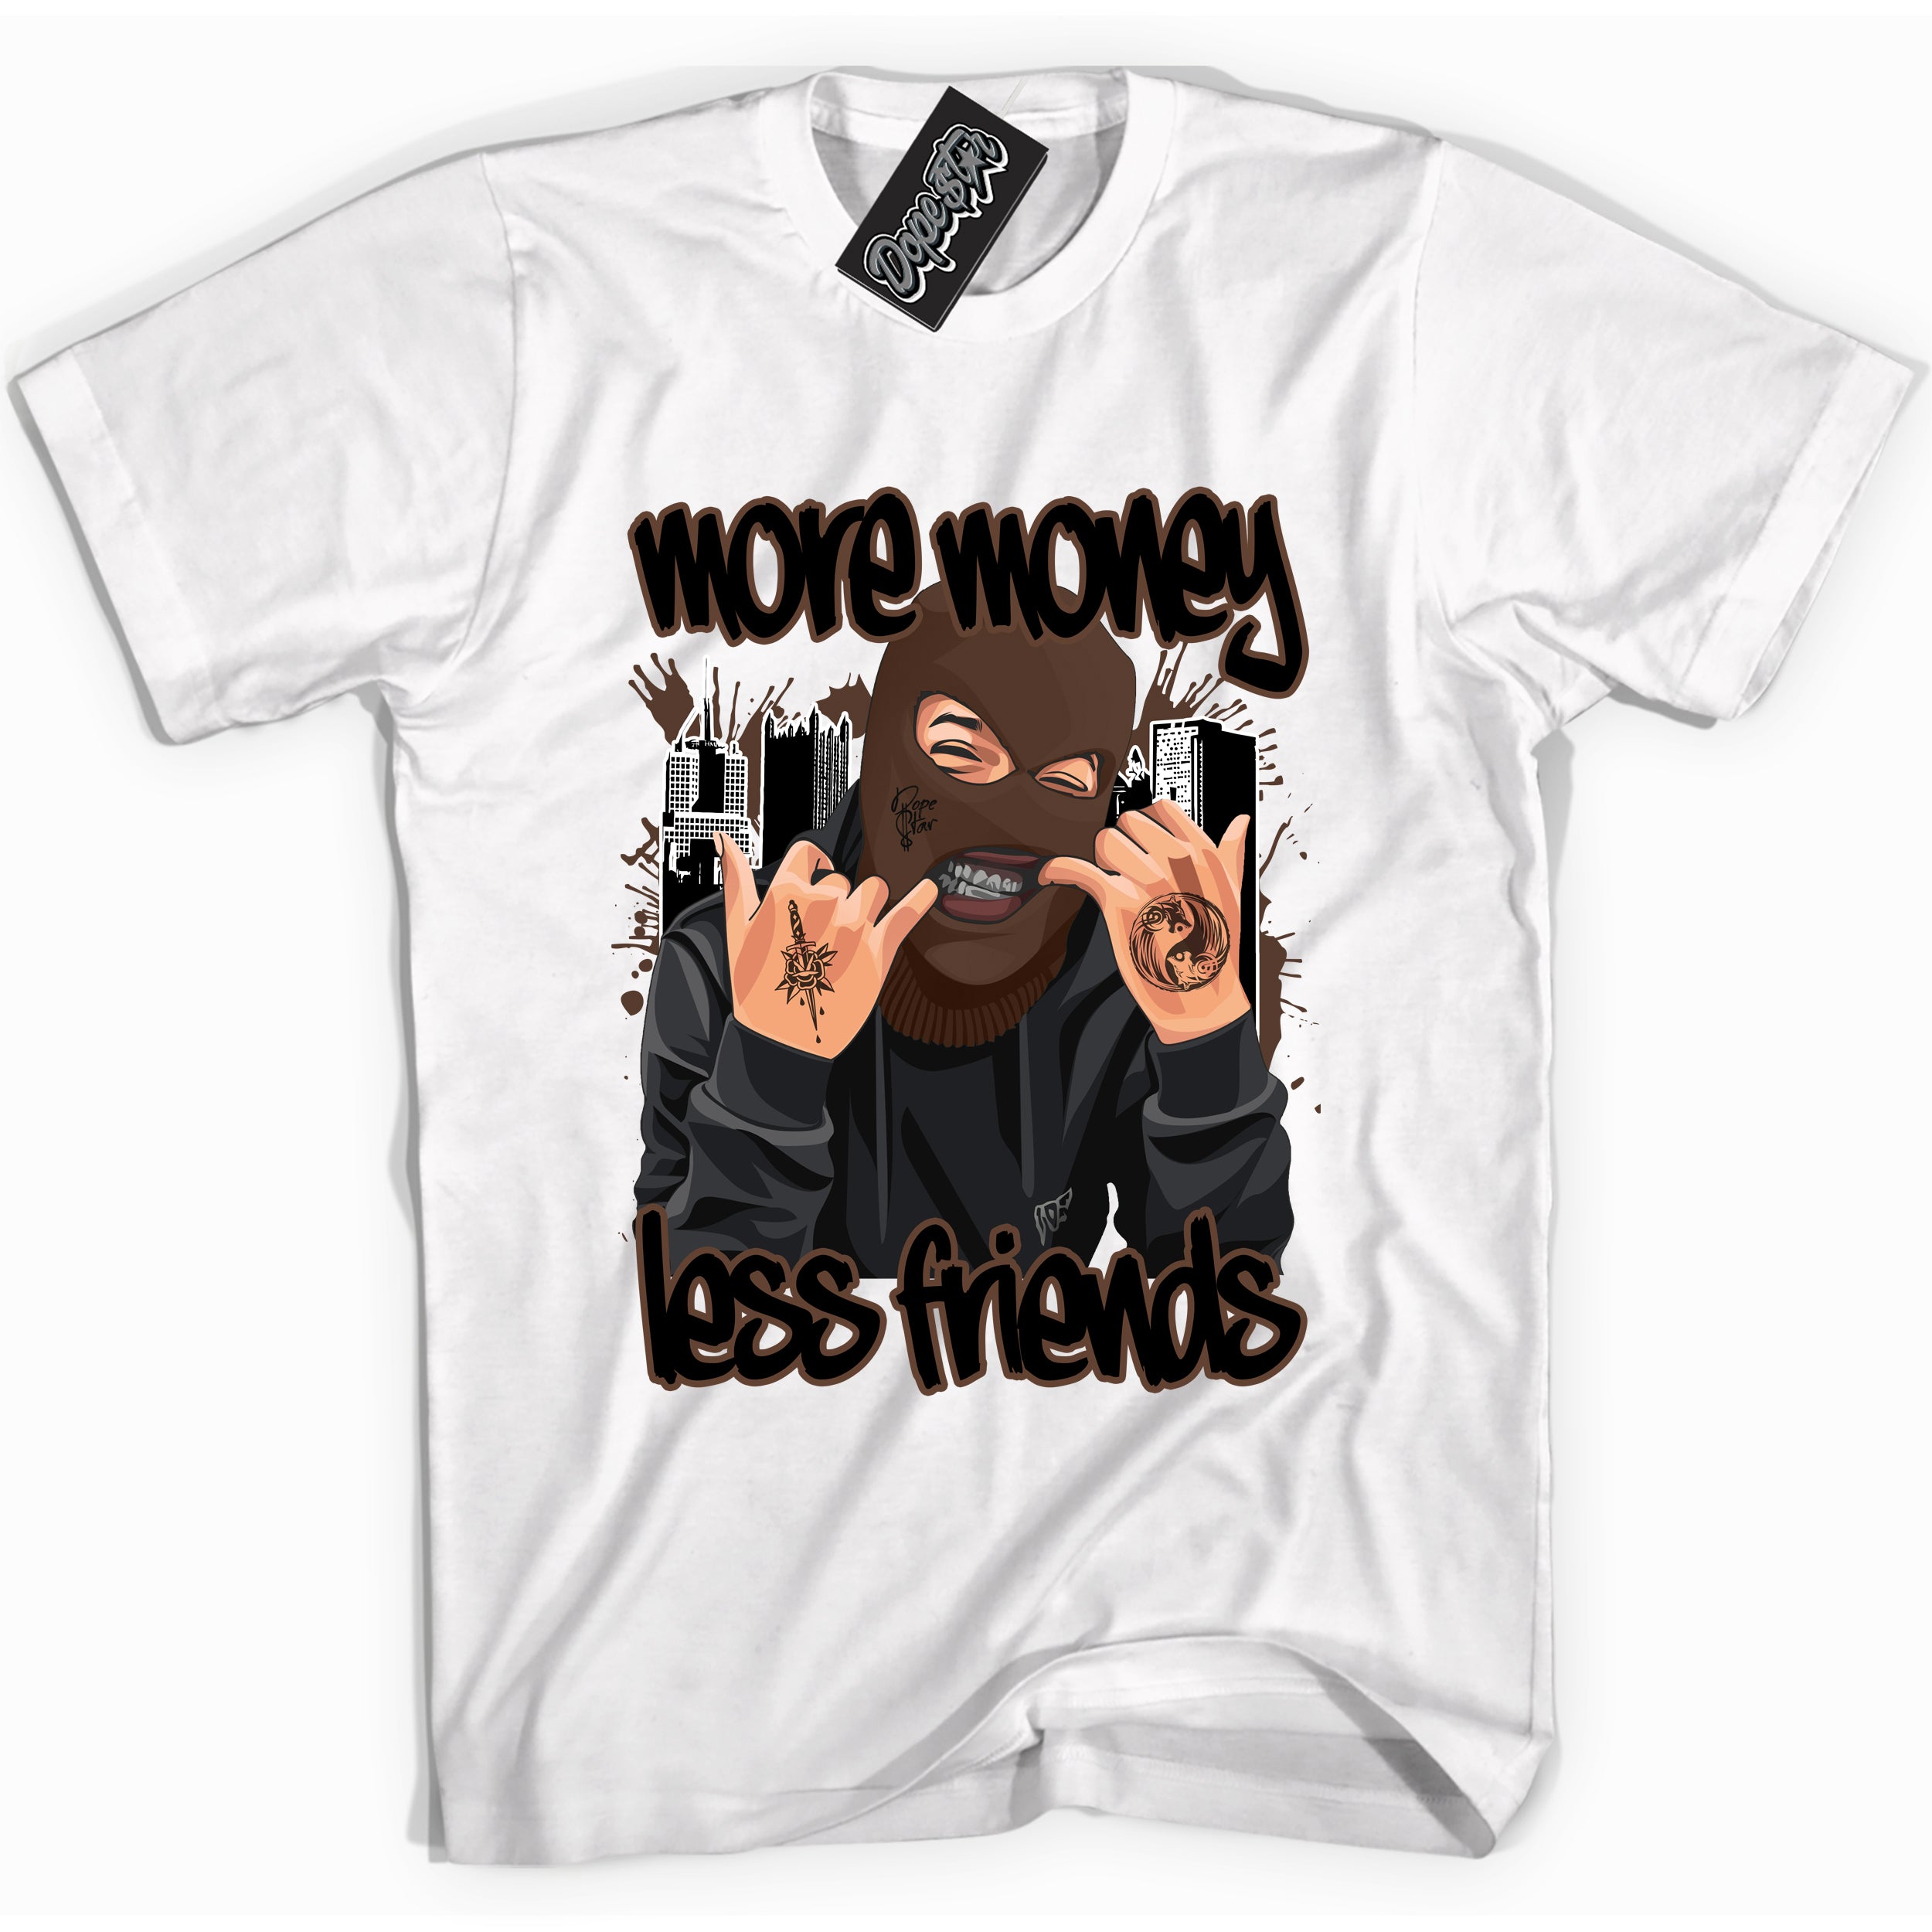 Cool White graphic tee with “ More Money Less Friends ” design, that perfectly matches Palomino 1s sneakers 